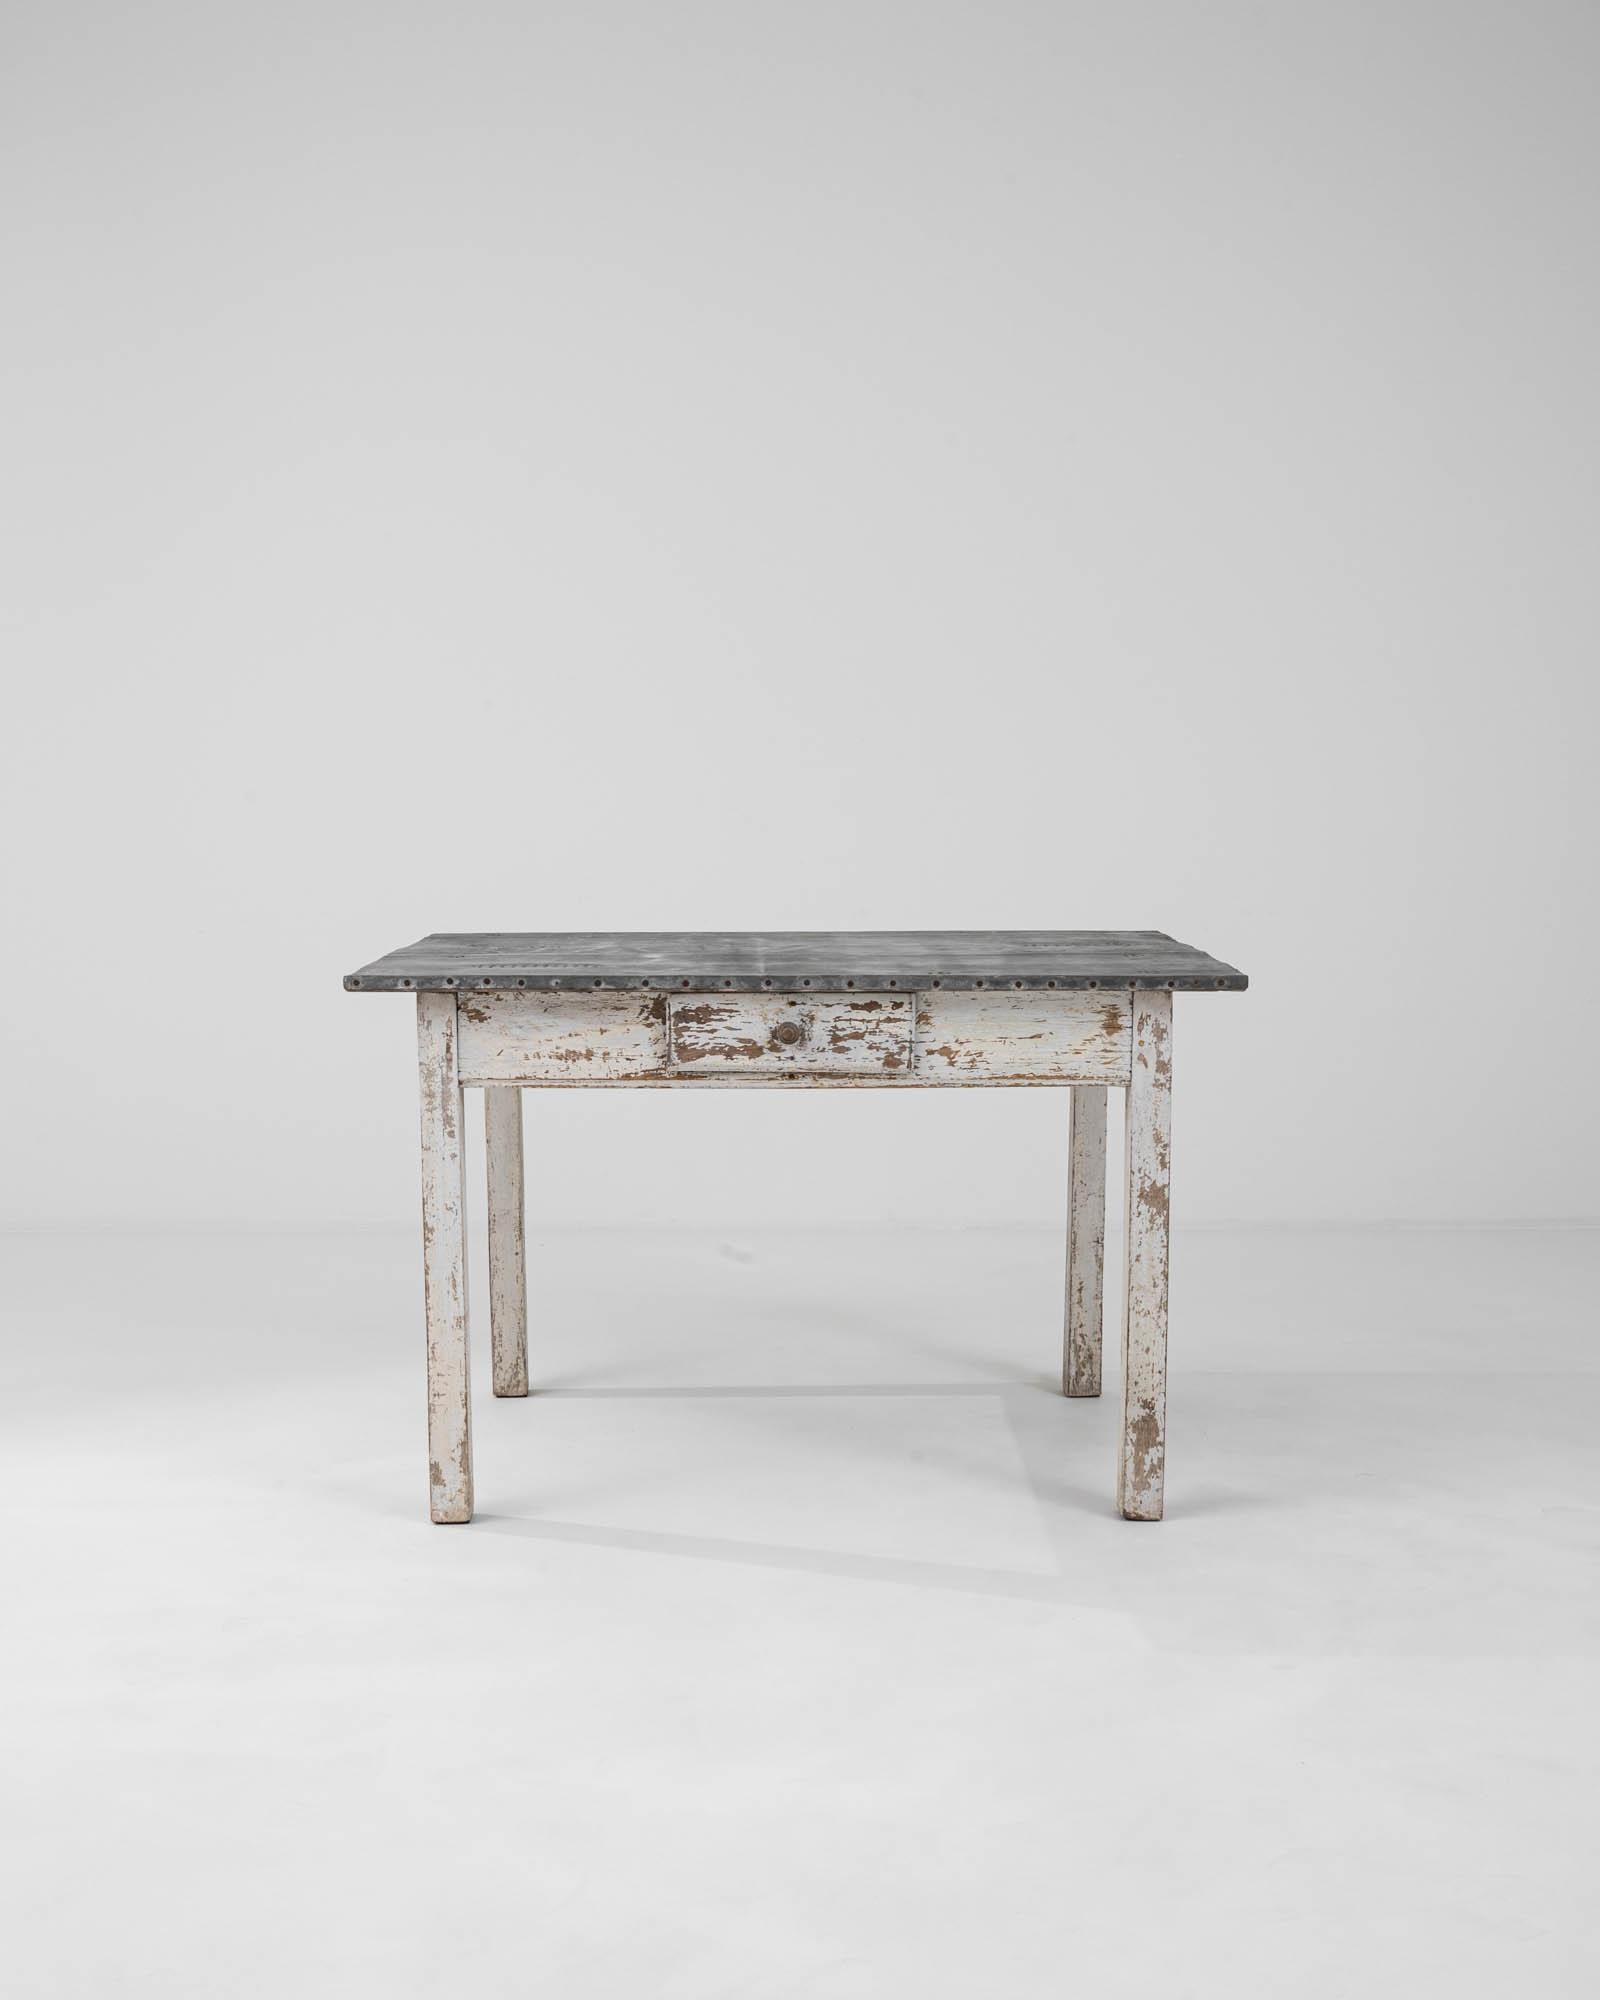 This early 1900s French wooden table with a zinc top exudes a sense of history and rustic charm. Its distressed white paintwork and weathered surfaces speak to its long-standing service and add a delightful shabby chic aesthetic to any space. The